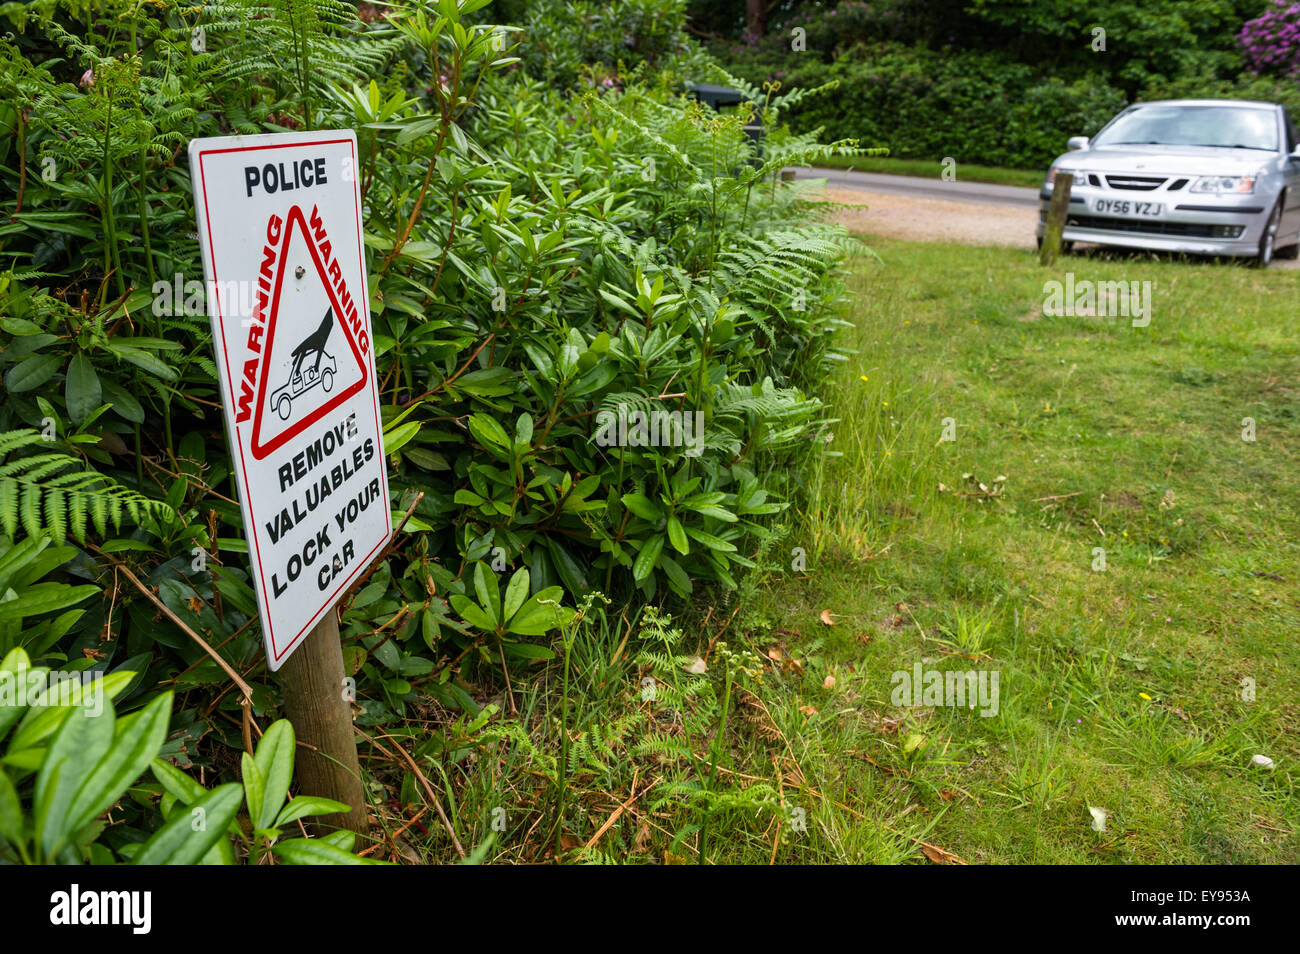 Police warning notice, lock your car, remove valuables. Stock Photo